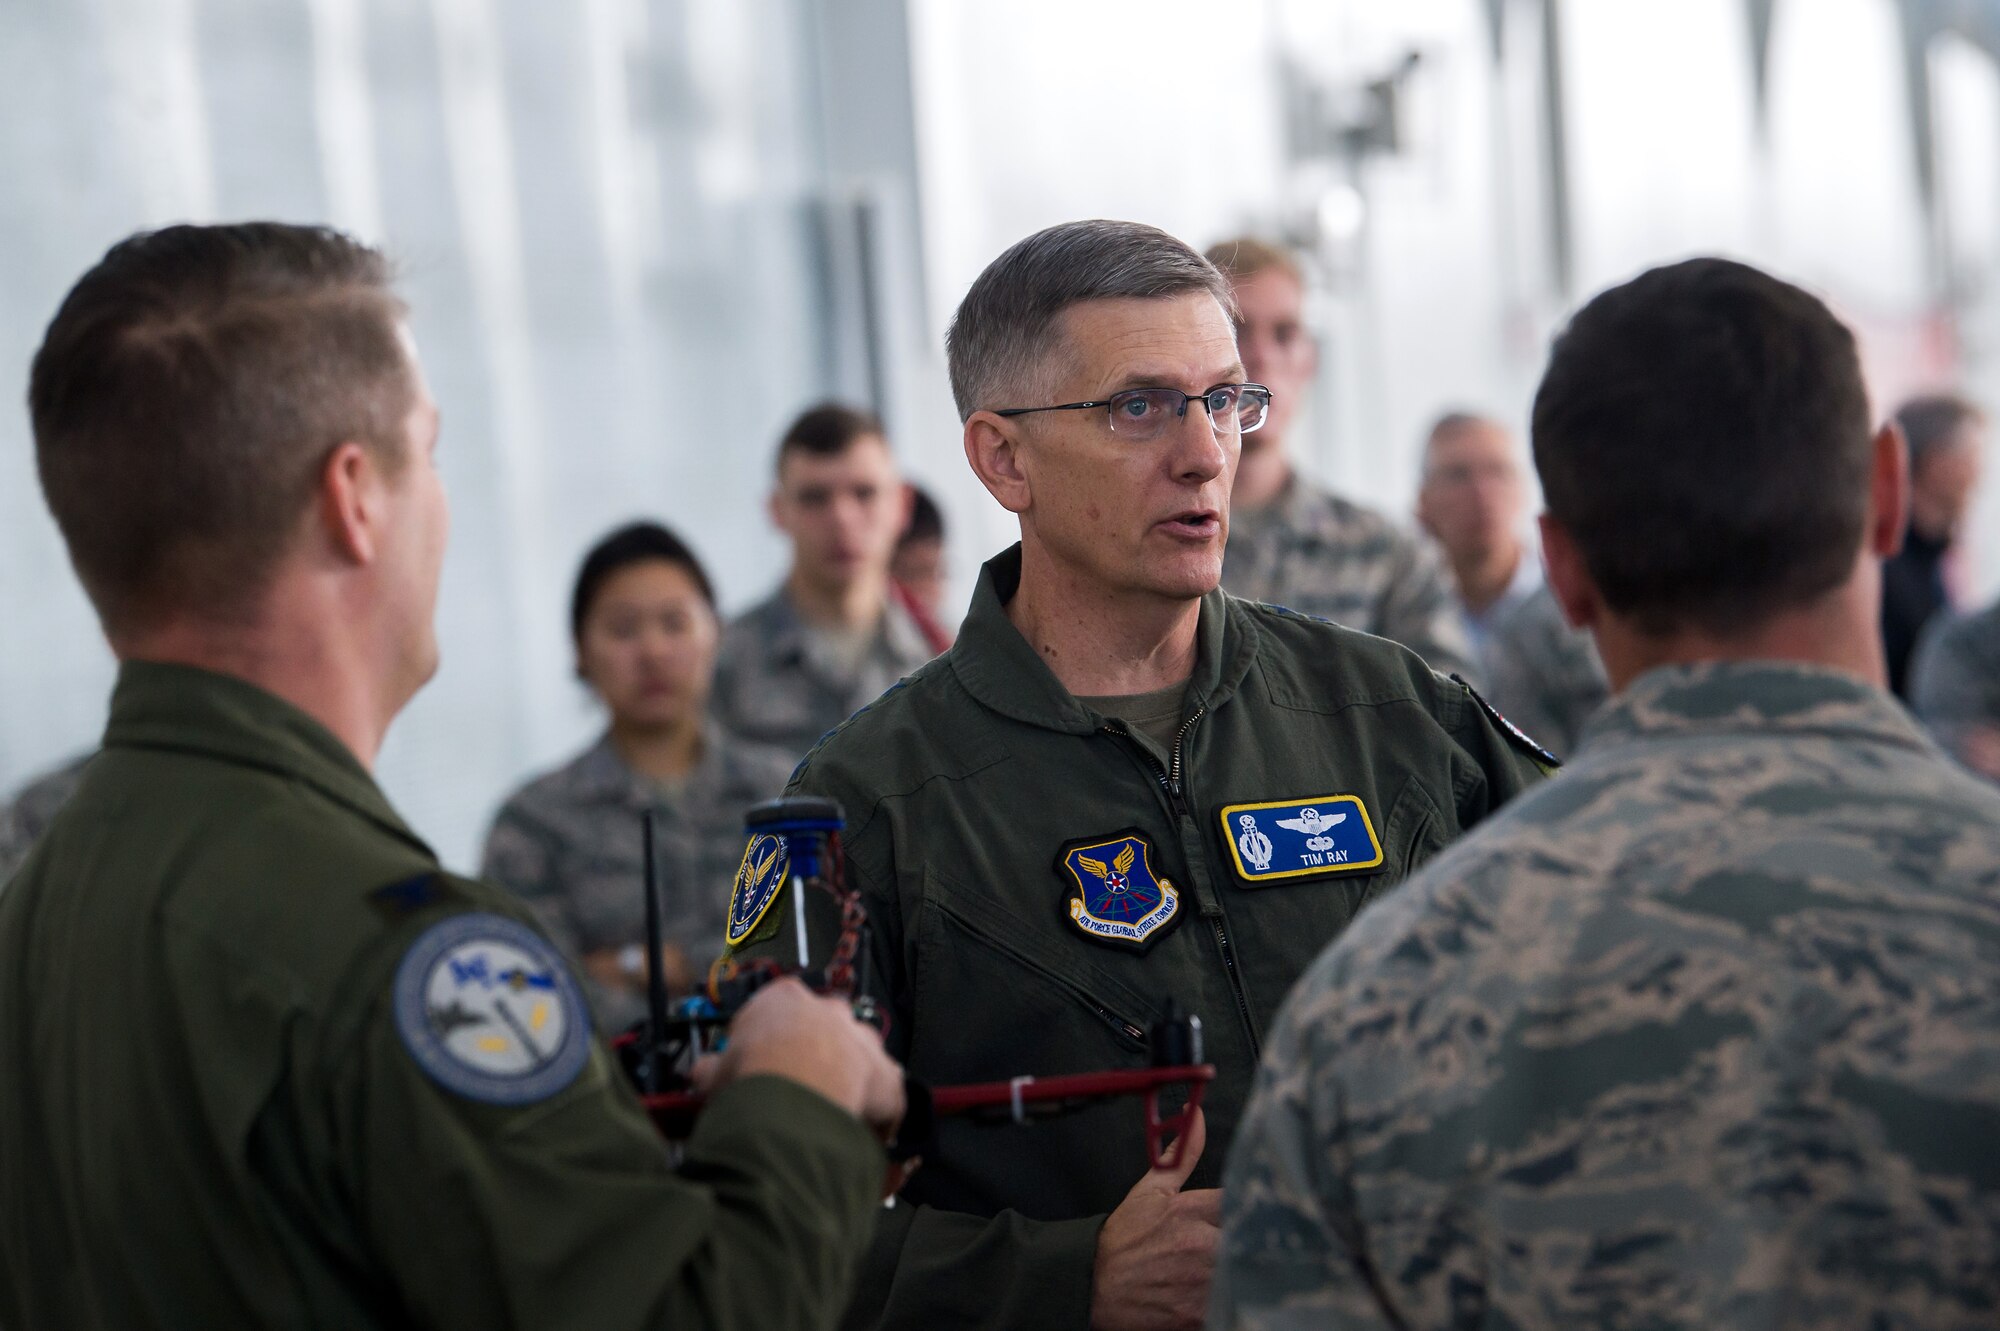 Gen. Tim Ray, Air Force Global Strike Command commander, talks with Air Force Academy cadets during an immersion tour Oct. 2, 2019, at the U.S. Air Force Academy, Colo. As part of Ray’s visit to the Academy, he met with cadets and faculty members involved in the Unmanned Aerial Systems research program. (U.S. Air Force photo by Trevor Cokley)